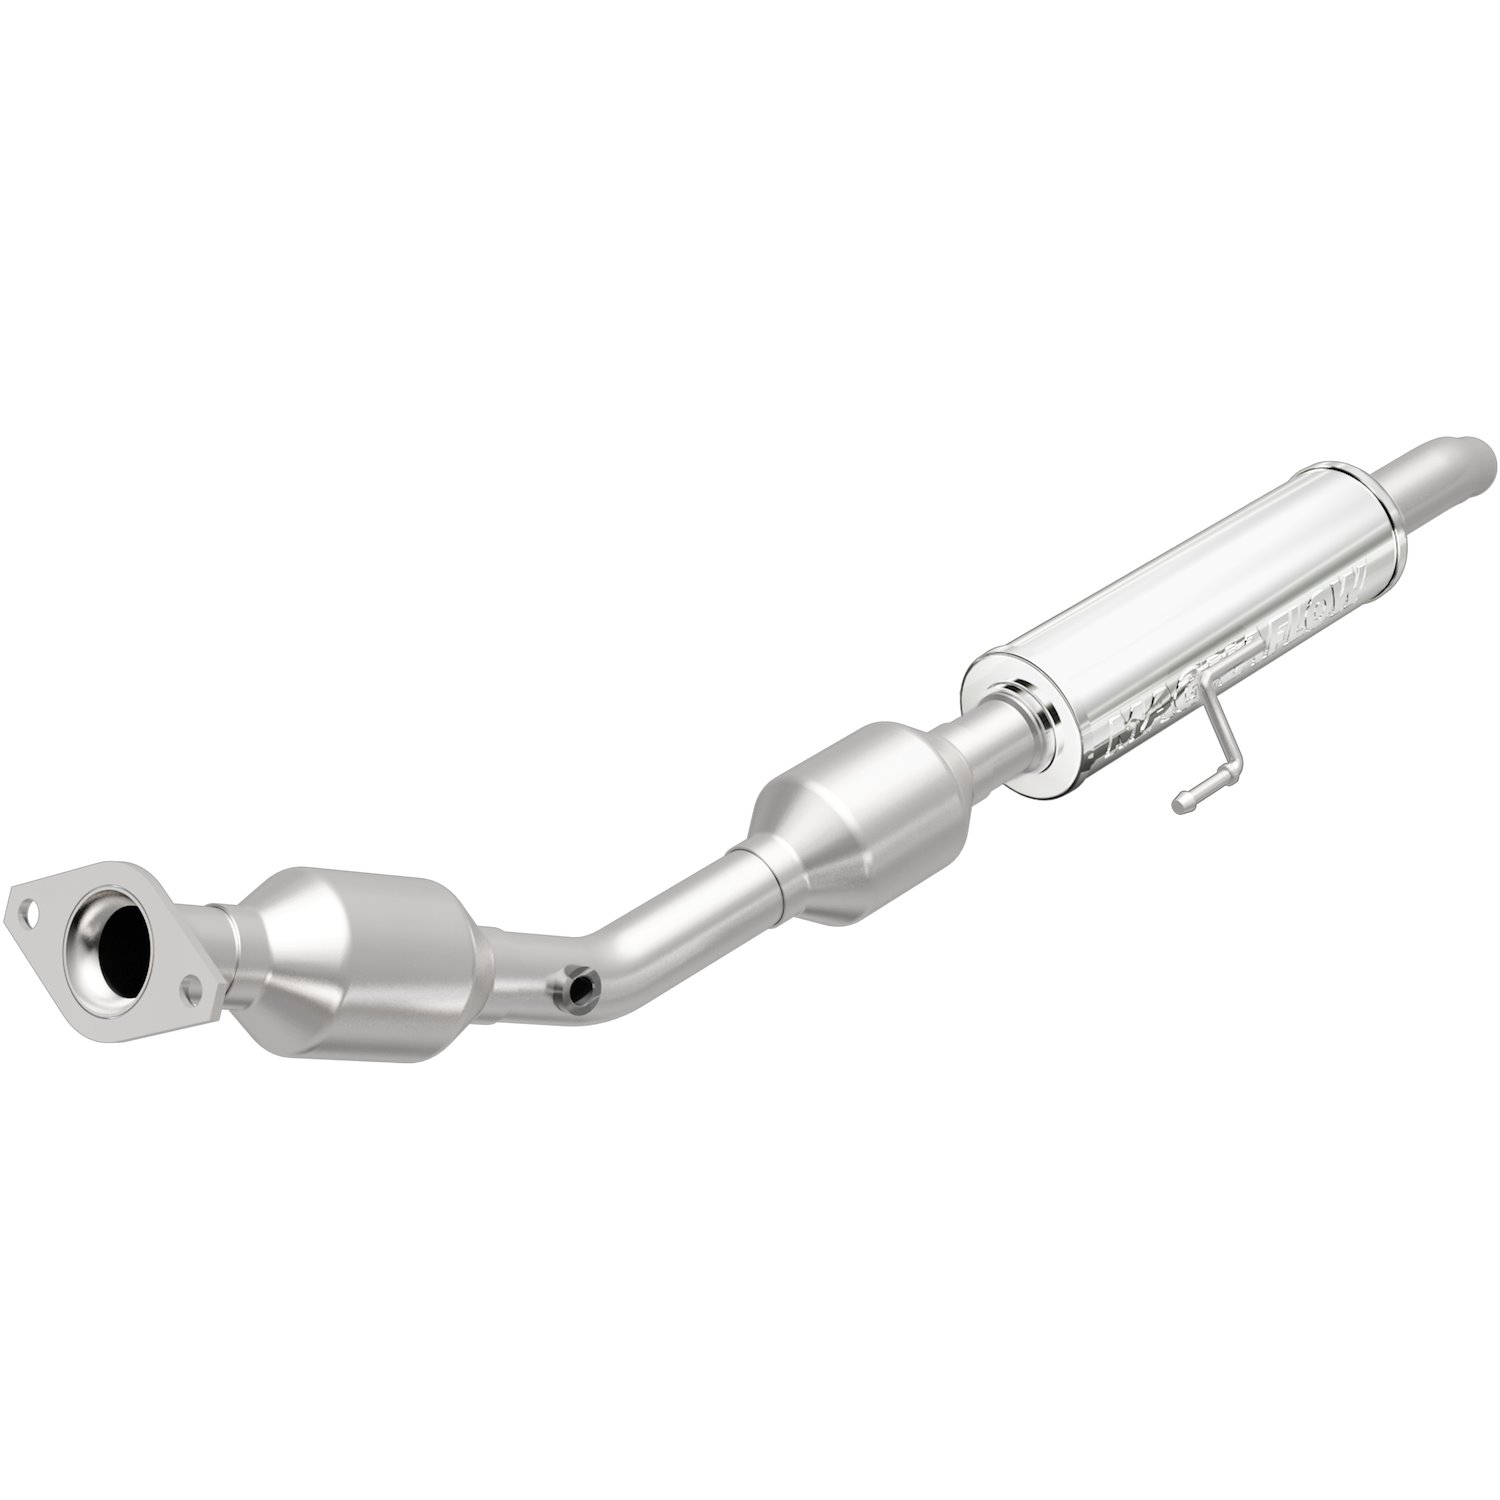 2007-2011 Toyota Yaris OEM Grade Federal / EPA Compliant Direct-Fit Catalytic Converter